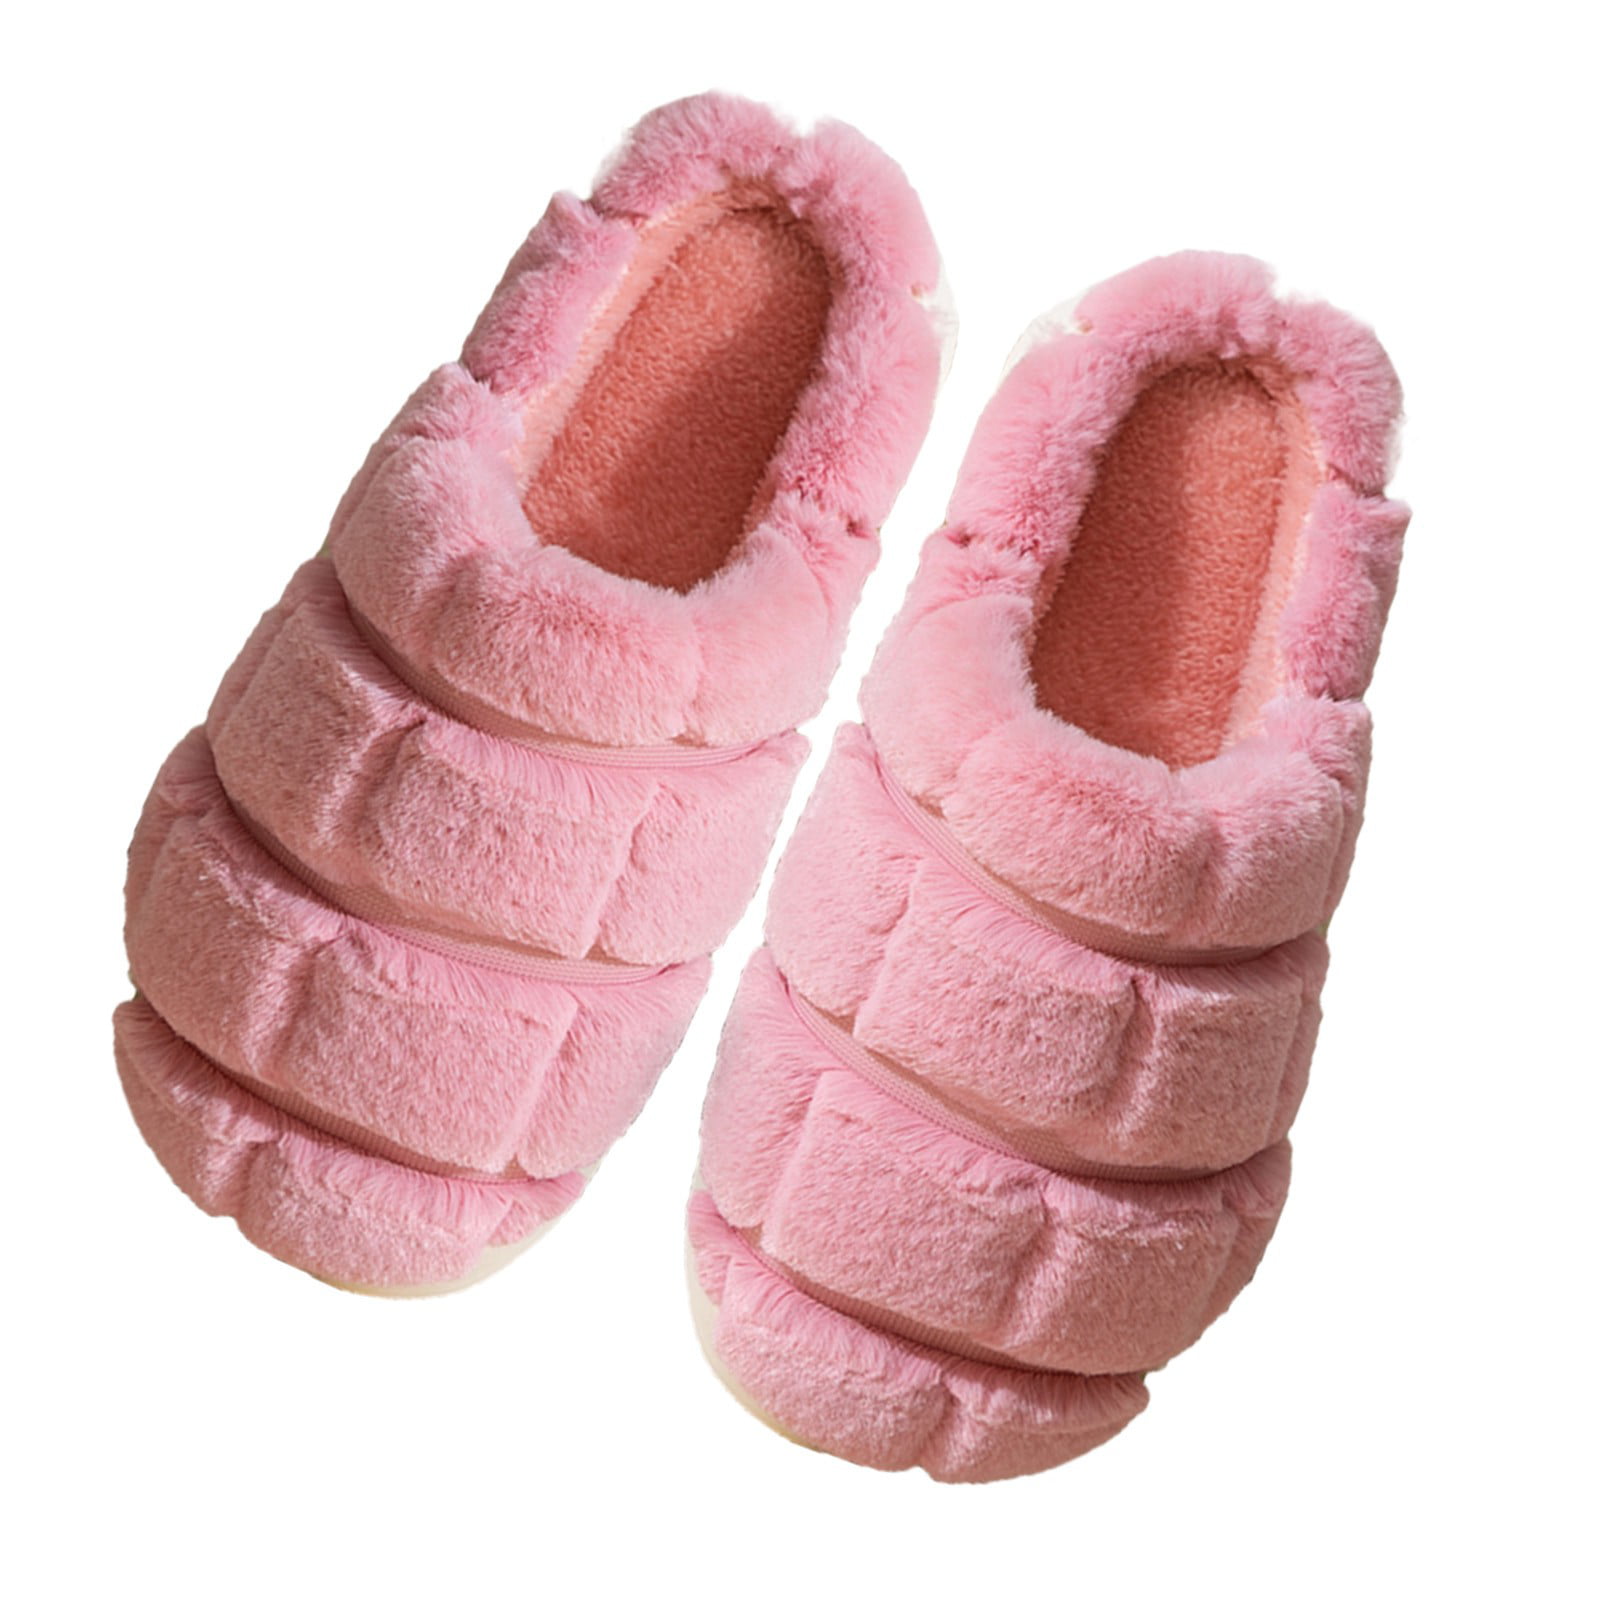 Buy Wholesale kid heated slippers For Industrial Purposes - Alibaba.com.